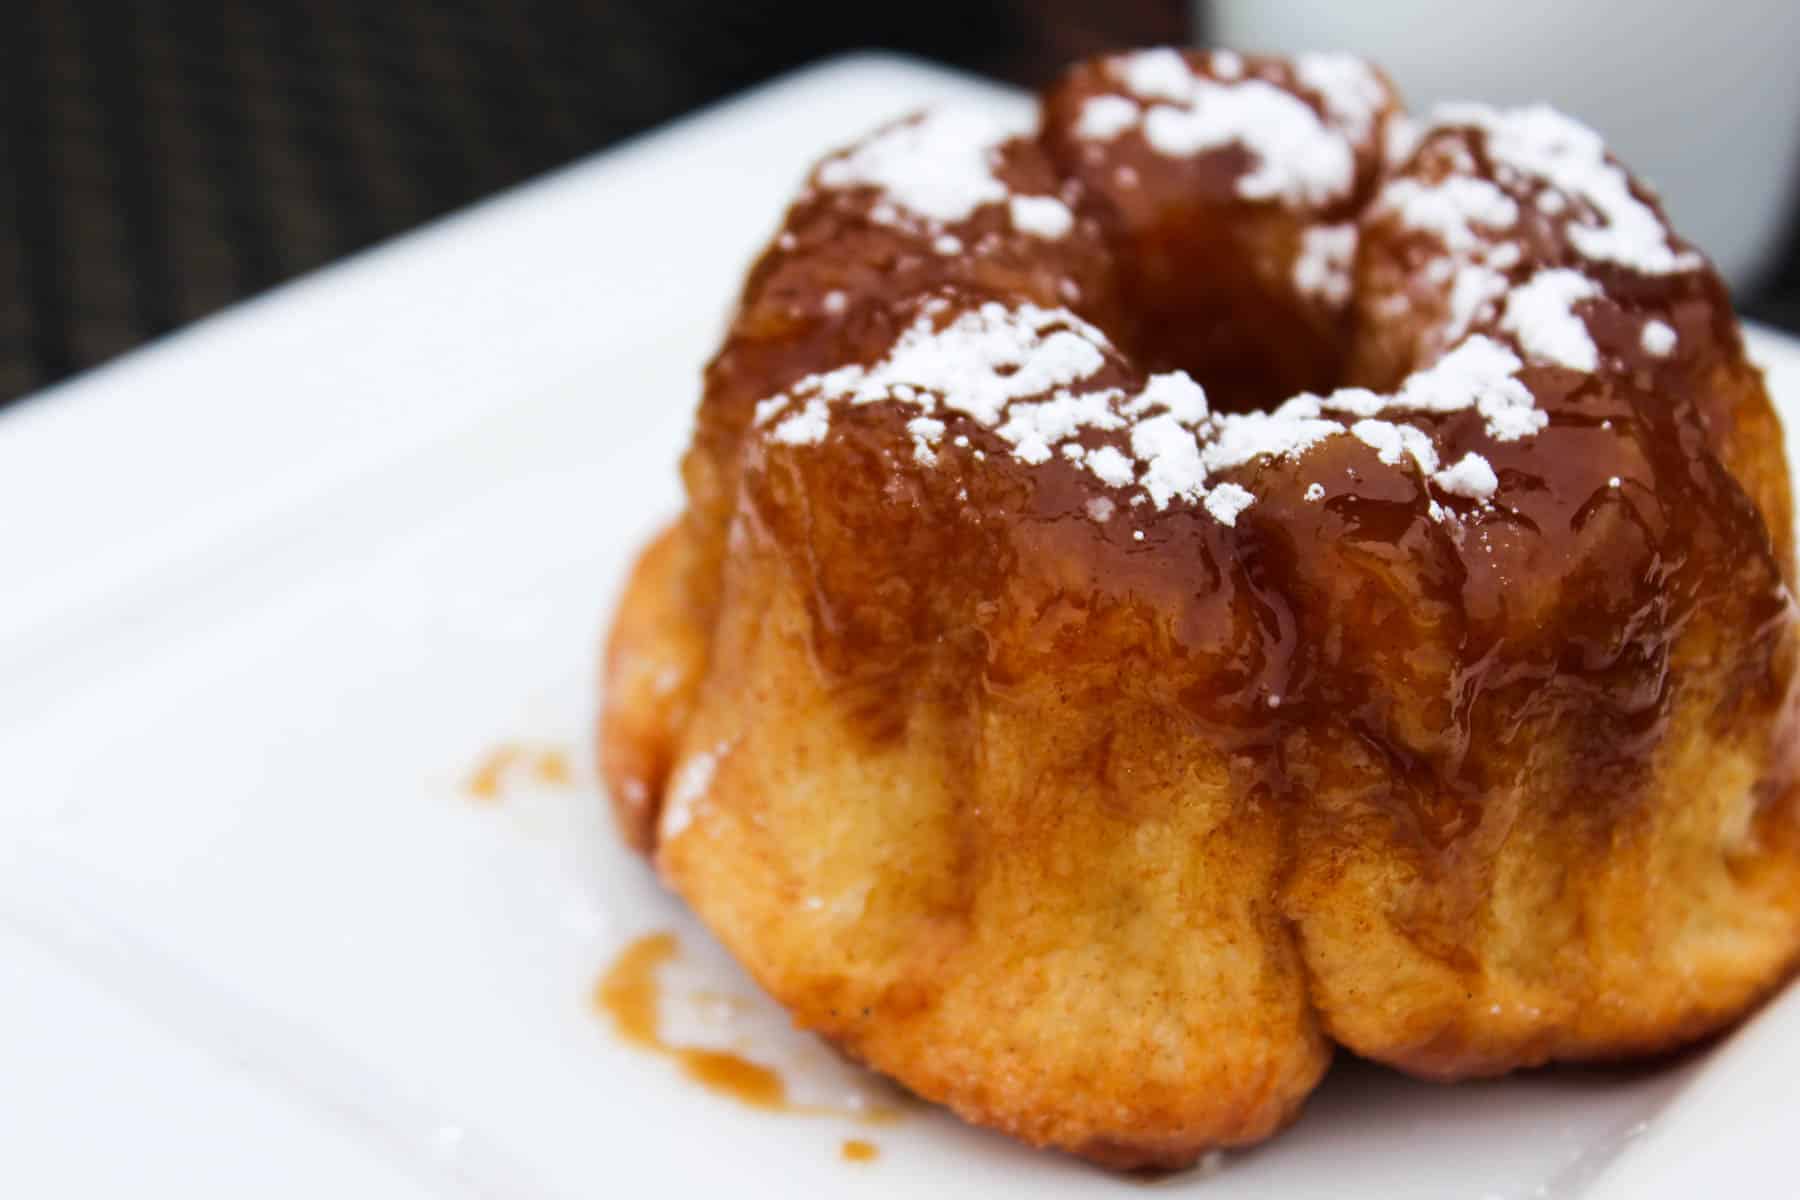 There is such a vast array of Milwaukee restaurants nowadays! With over 1,300 options, there's a choice suited for every taste bud. Here are the Top 10! femalefoodie.com